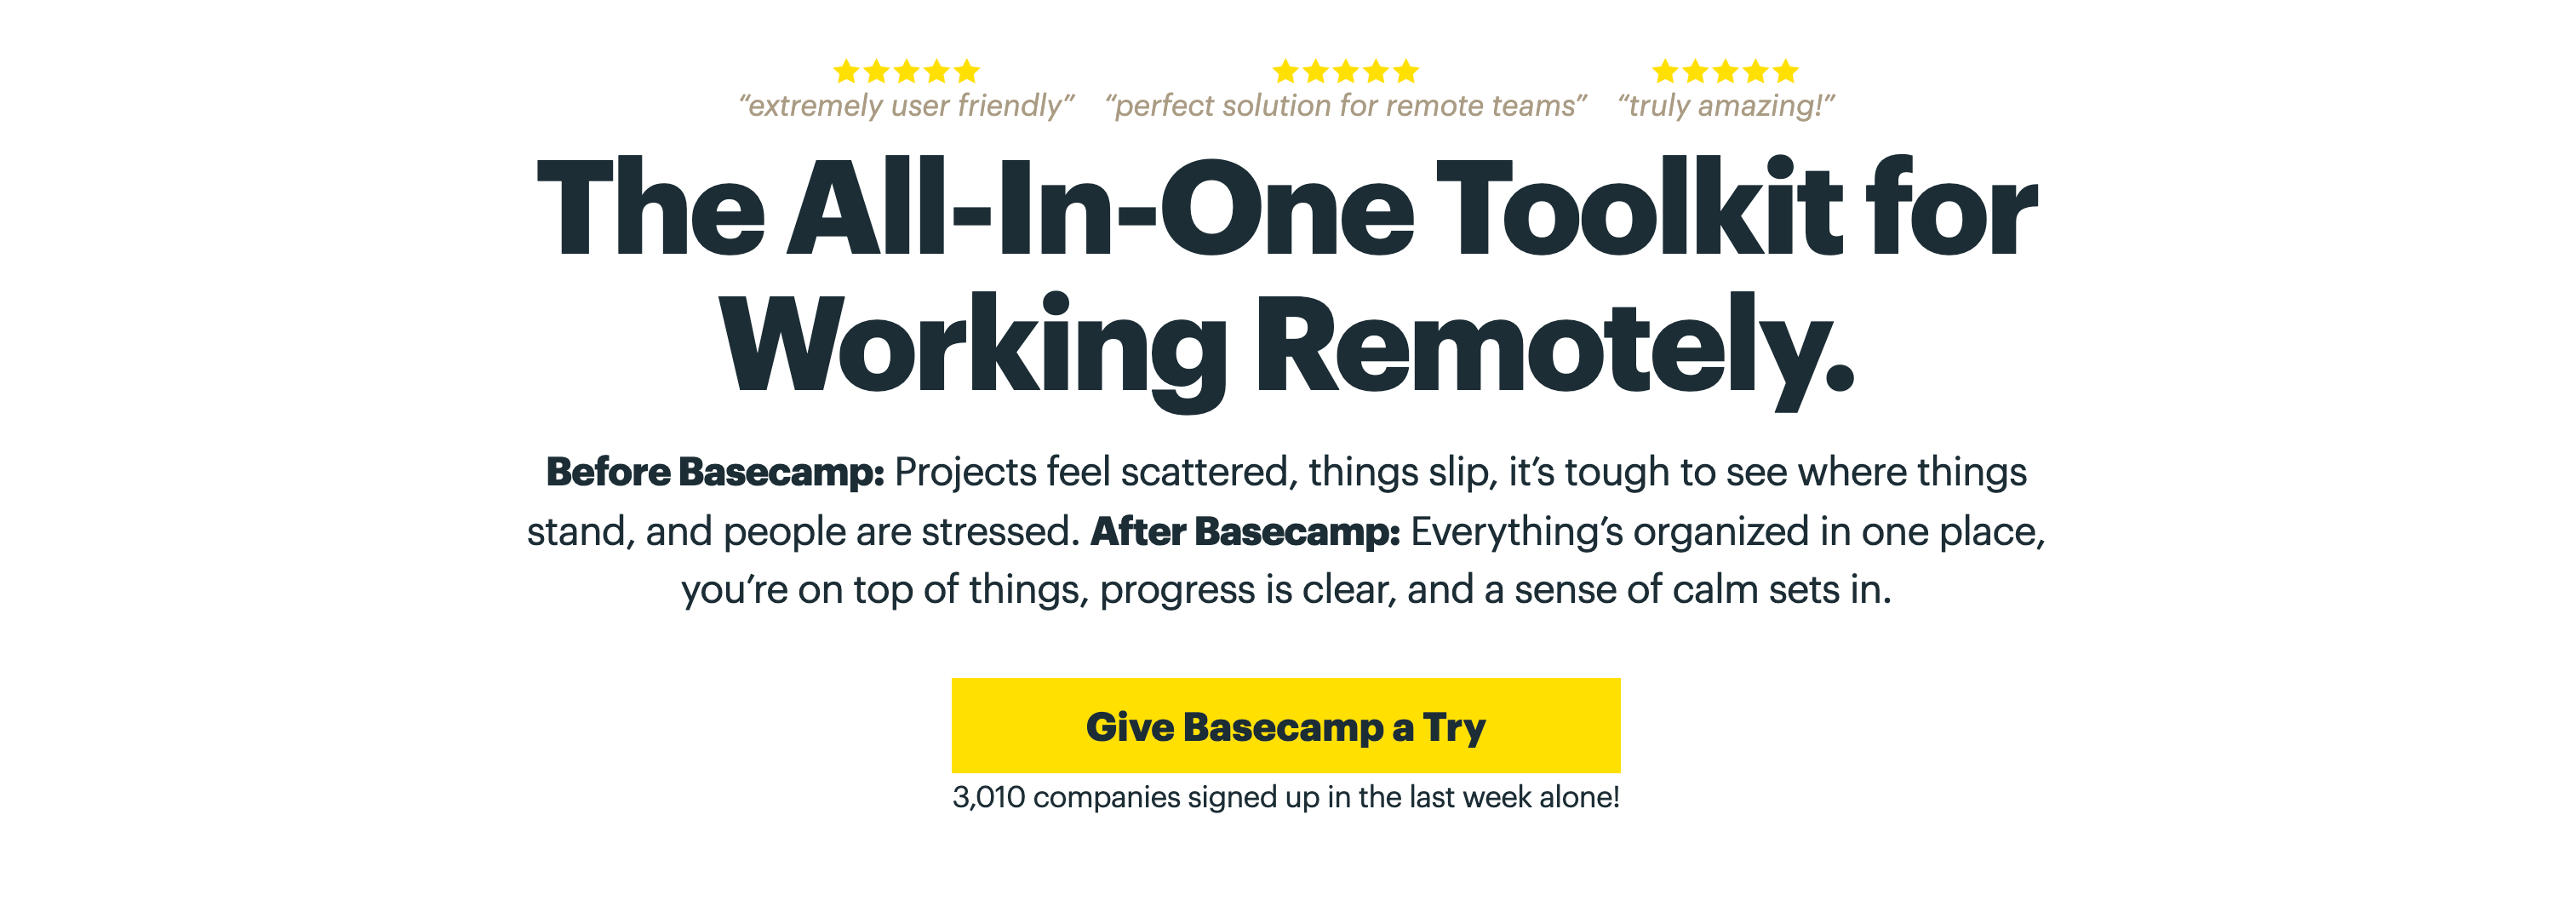 The homepage for Basecamp